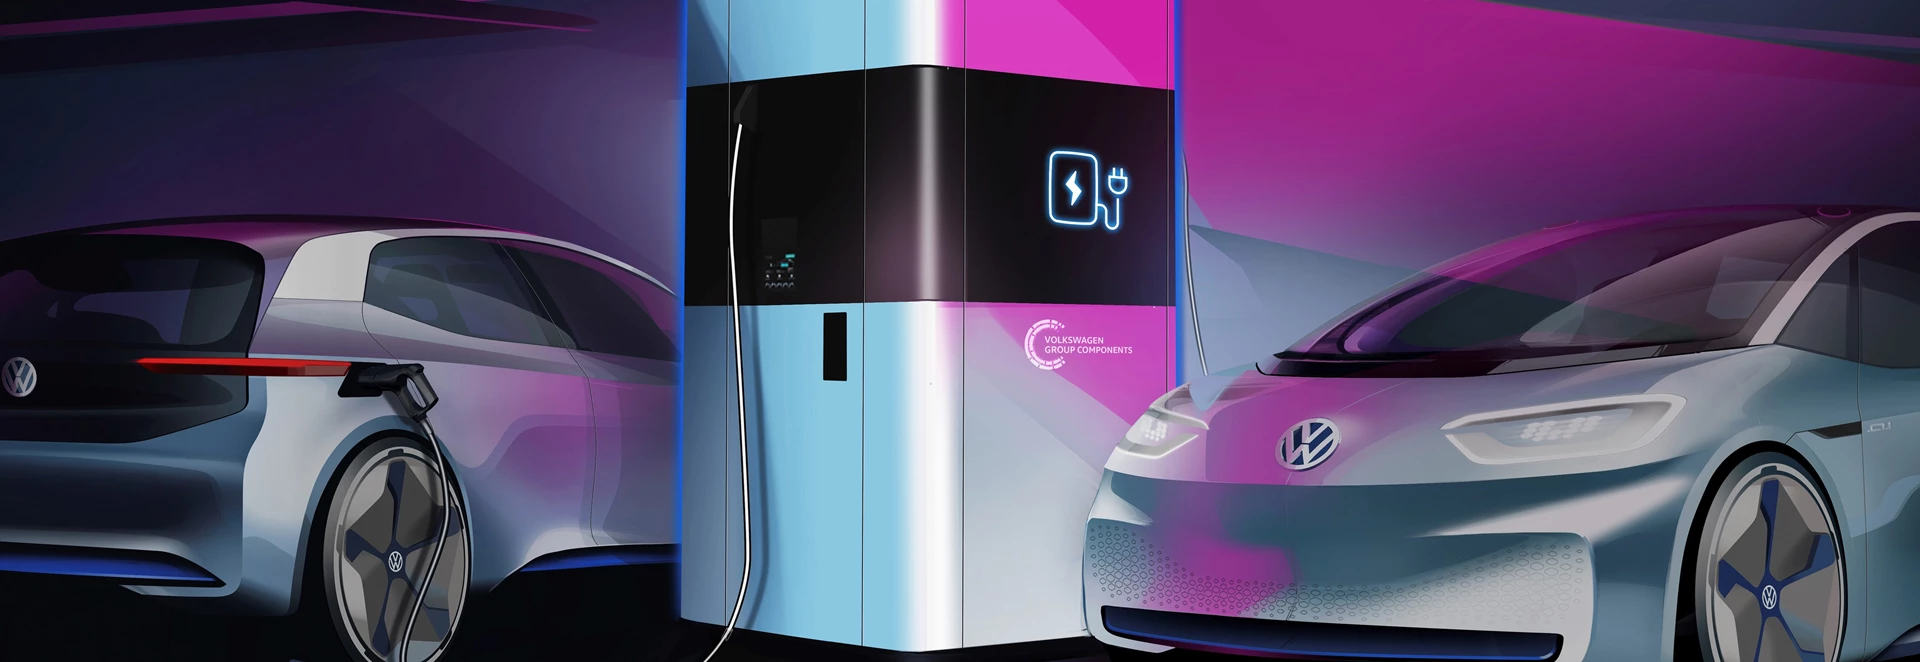 Volkswagen shows off mobile charging station for the first time